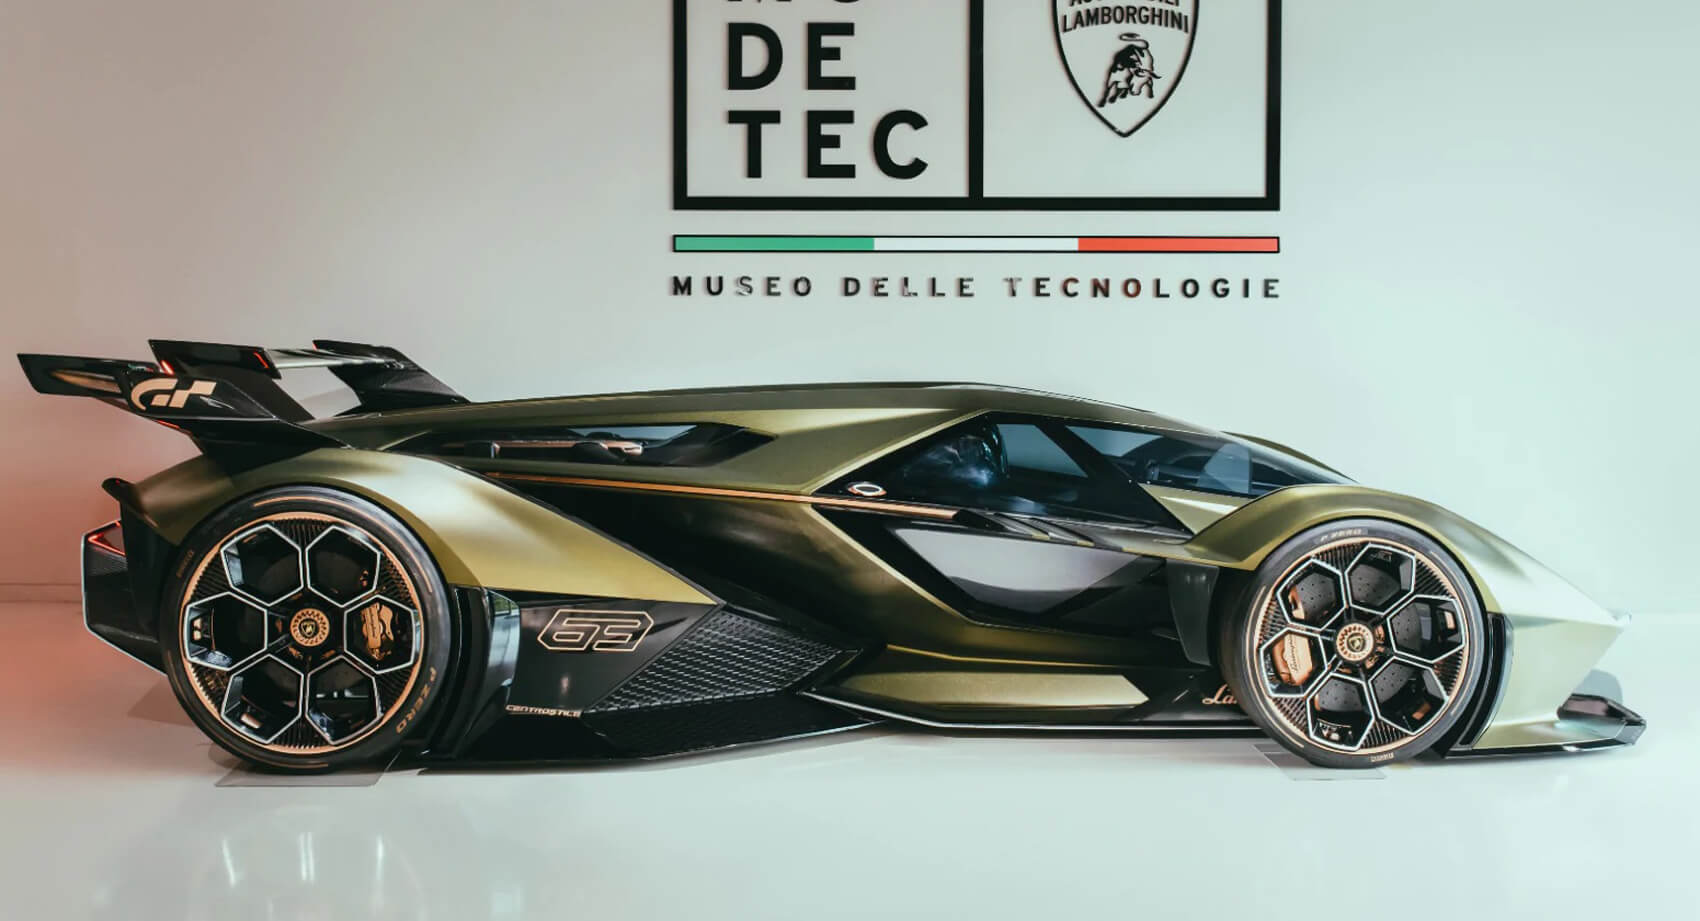 Lamborghini's Stunning Lambo V12 GT Vision Gran Turismo Touches Down In  Real Life | Carscoops